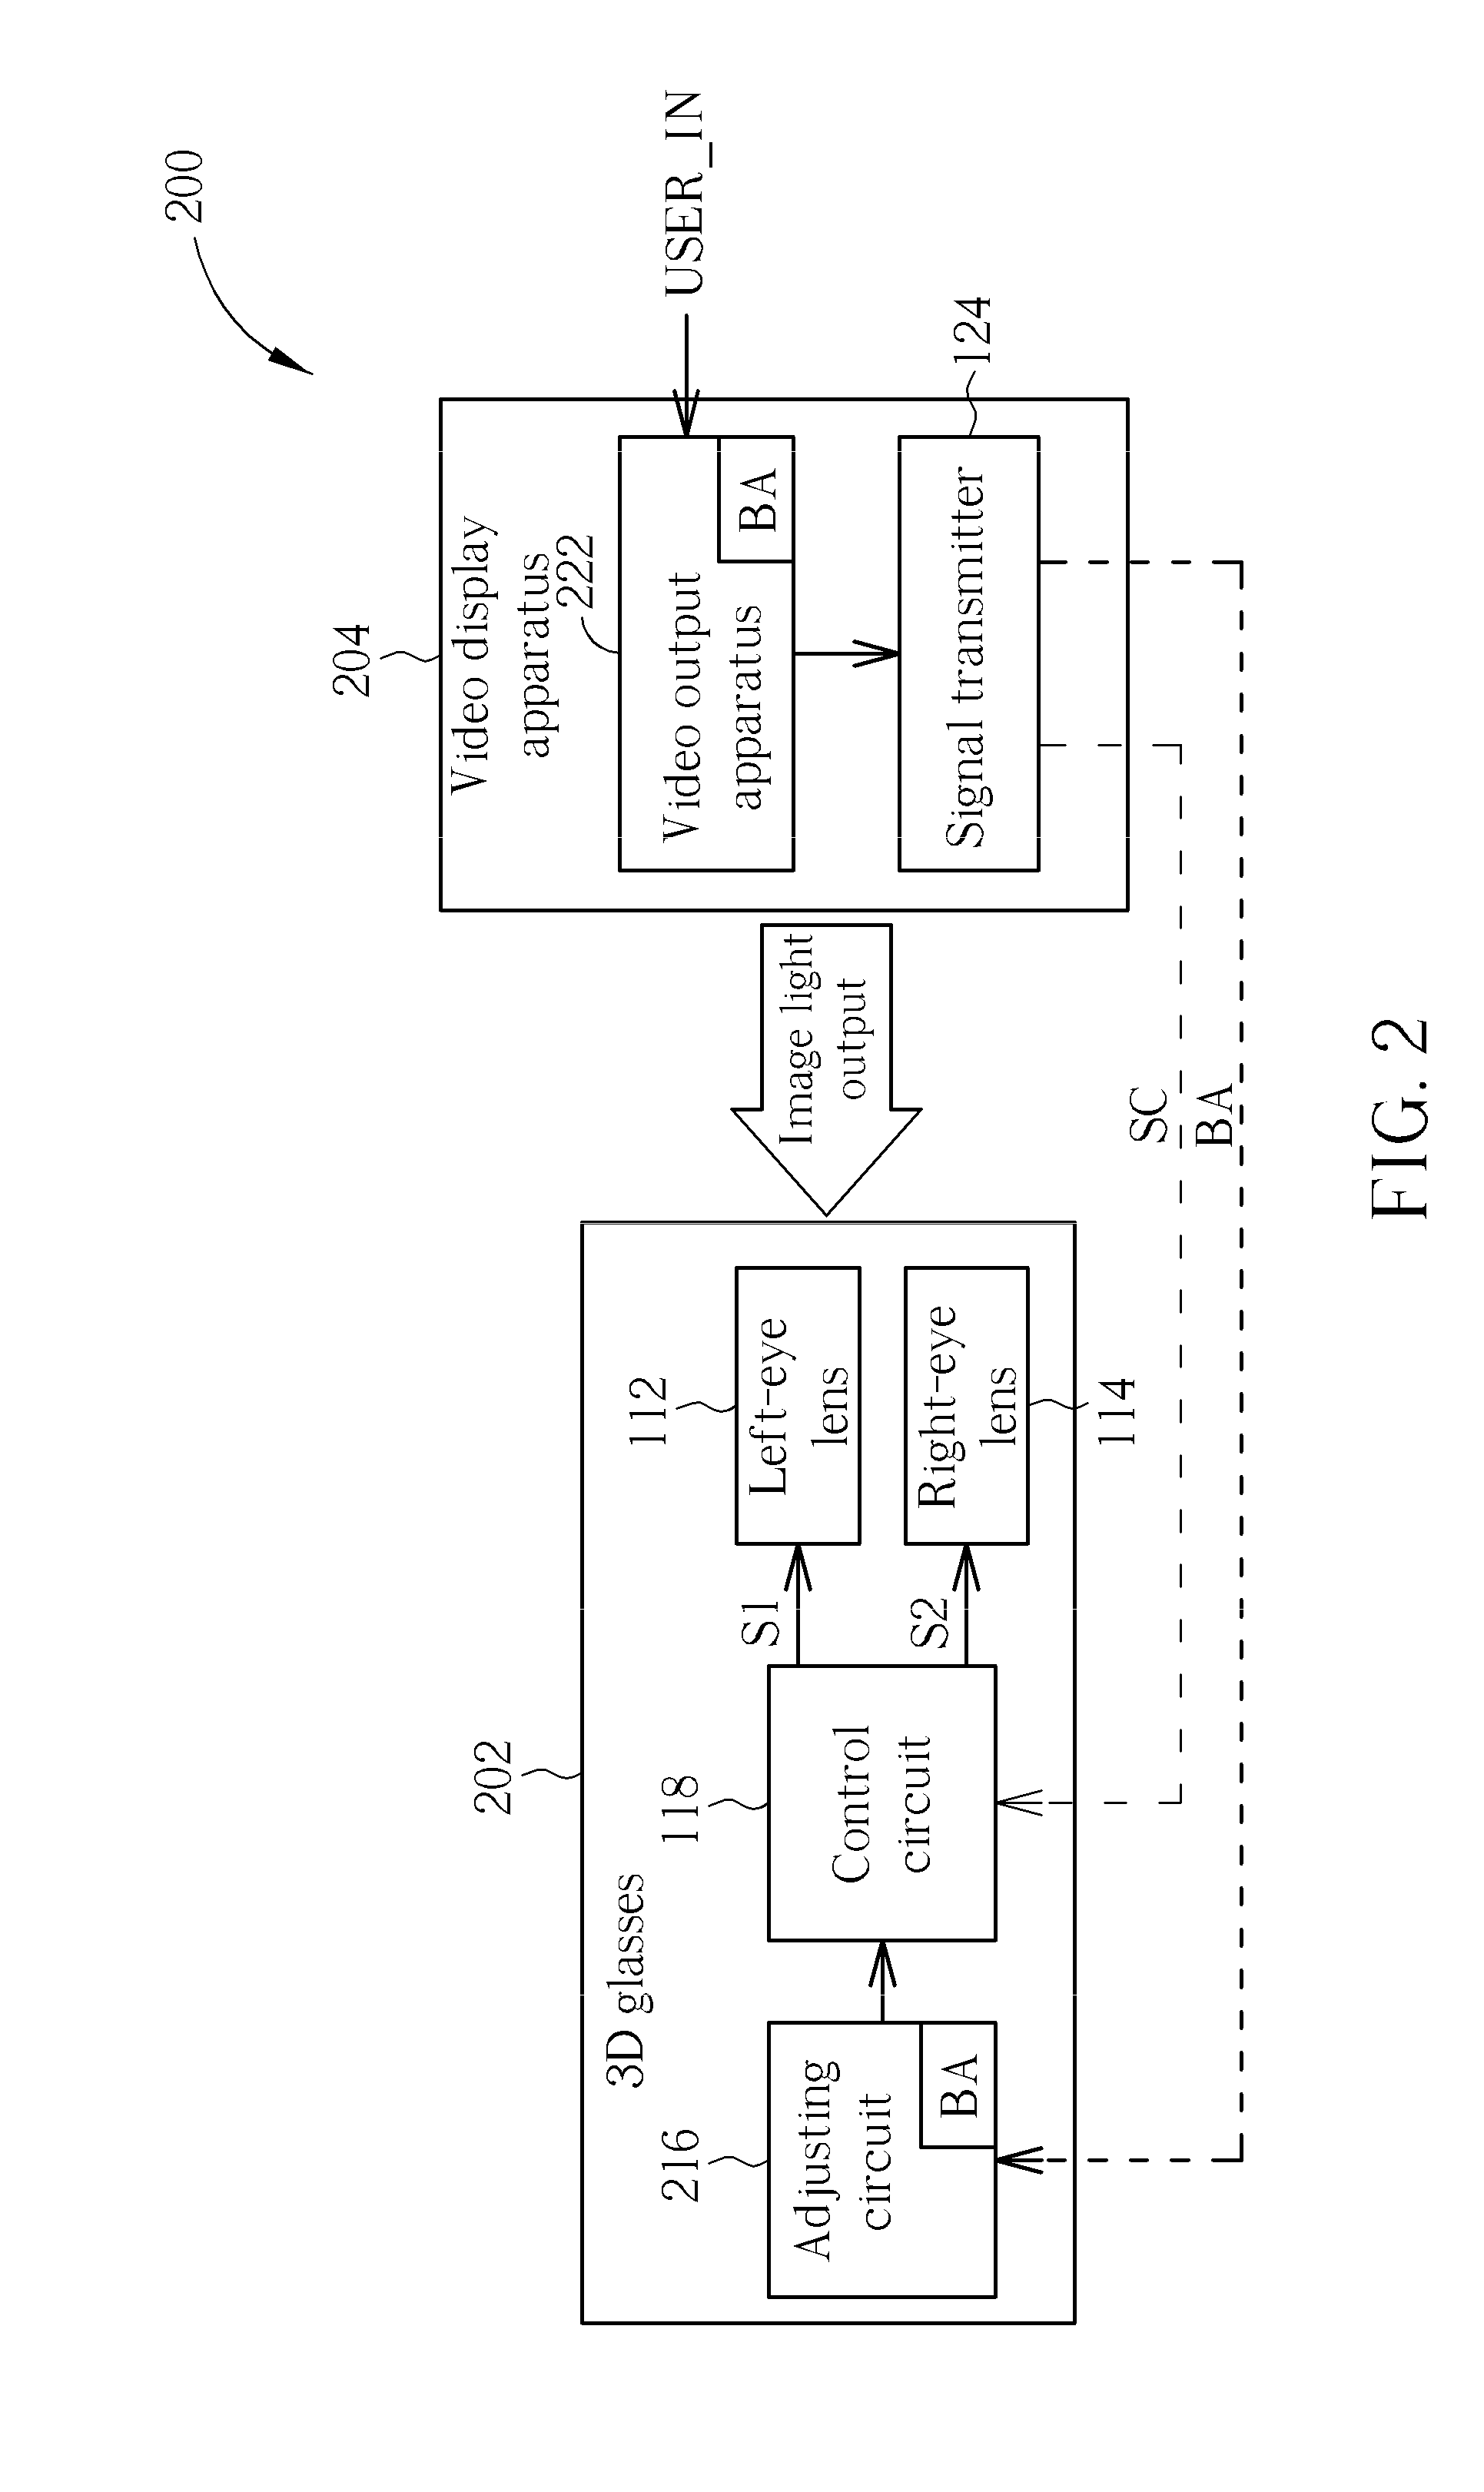 Method for controlling ambient brightness perceived via three-dimensional glasses by adjusting ambient brightness setting, three-dimensional glasses, and video display device thereof